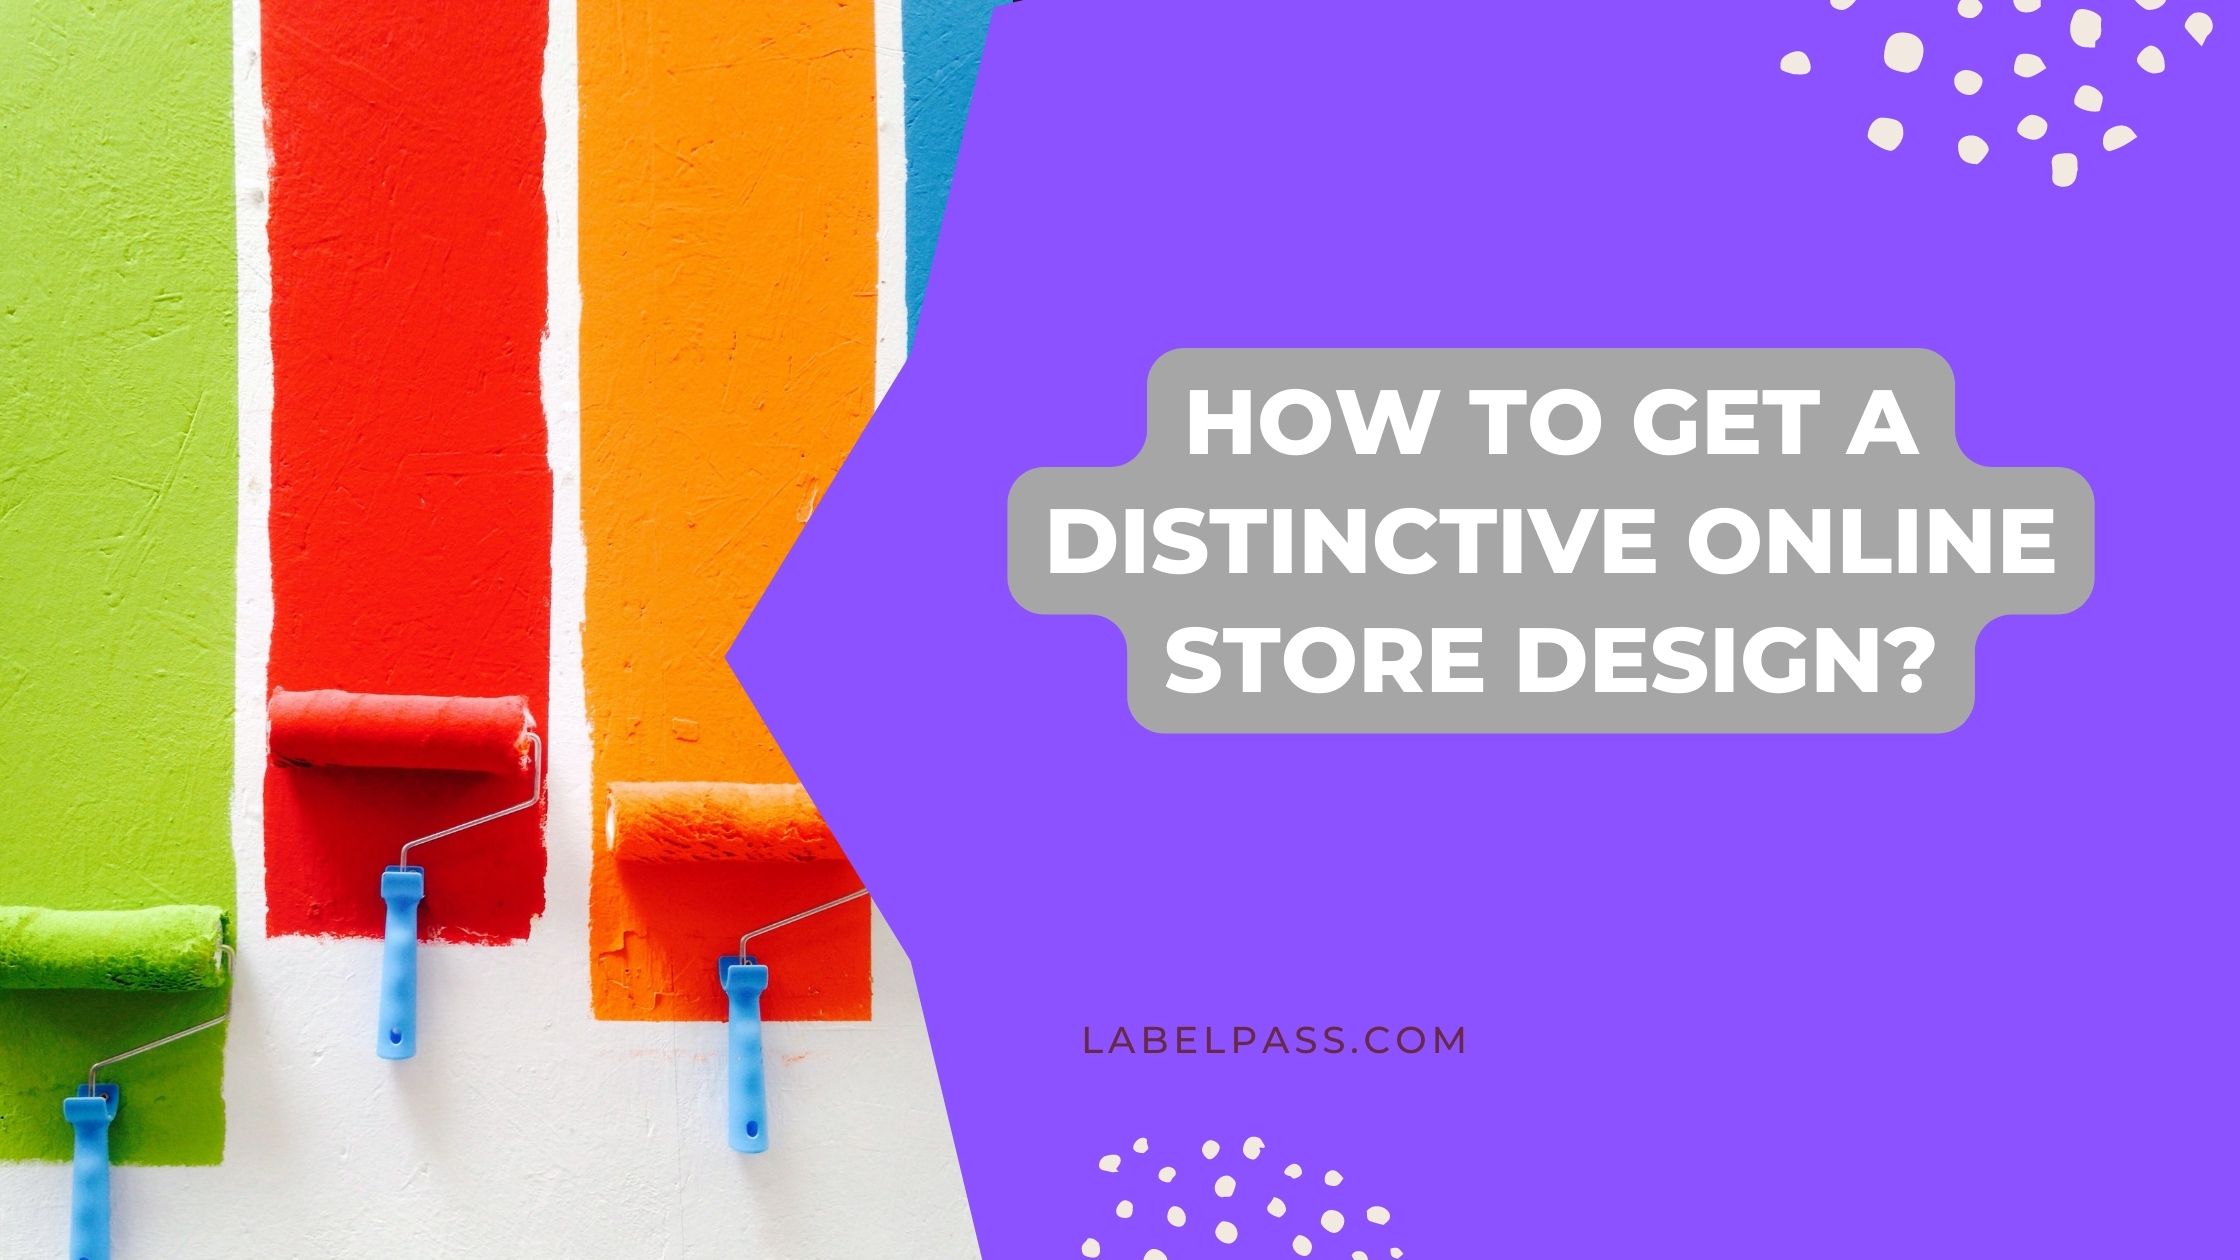 How to Get a Distinctive Online Store Design?